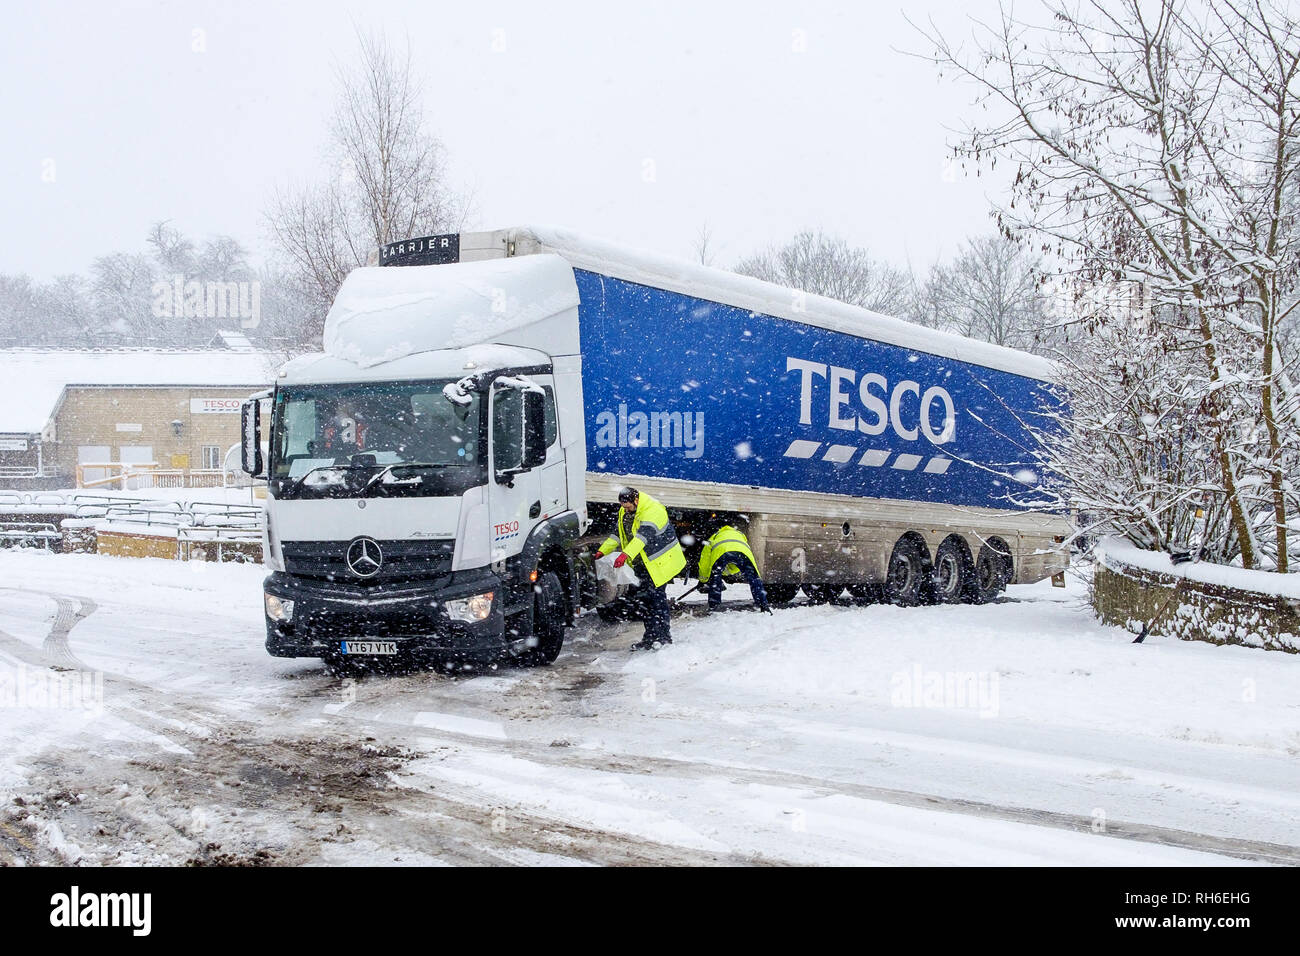 Chippenham, Wiltshire, UK. 1st February, 2019. Tesco's staff are pictured as they try to free a Tesco delivery truck that has become stuck in the snow as it tries to leave the store car park in Chippenham town centre. Credit: Lynchpics/Alamy Live News Stock Photo